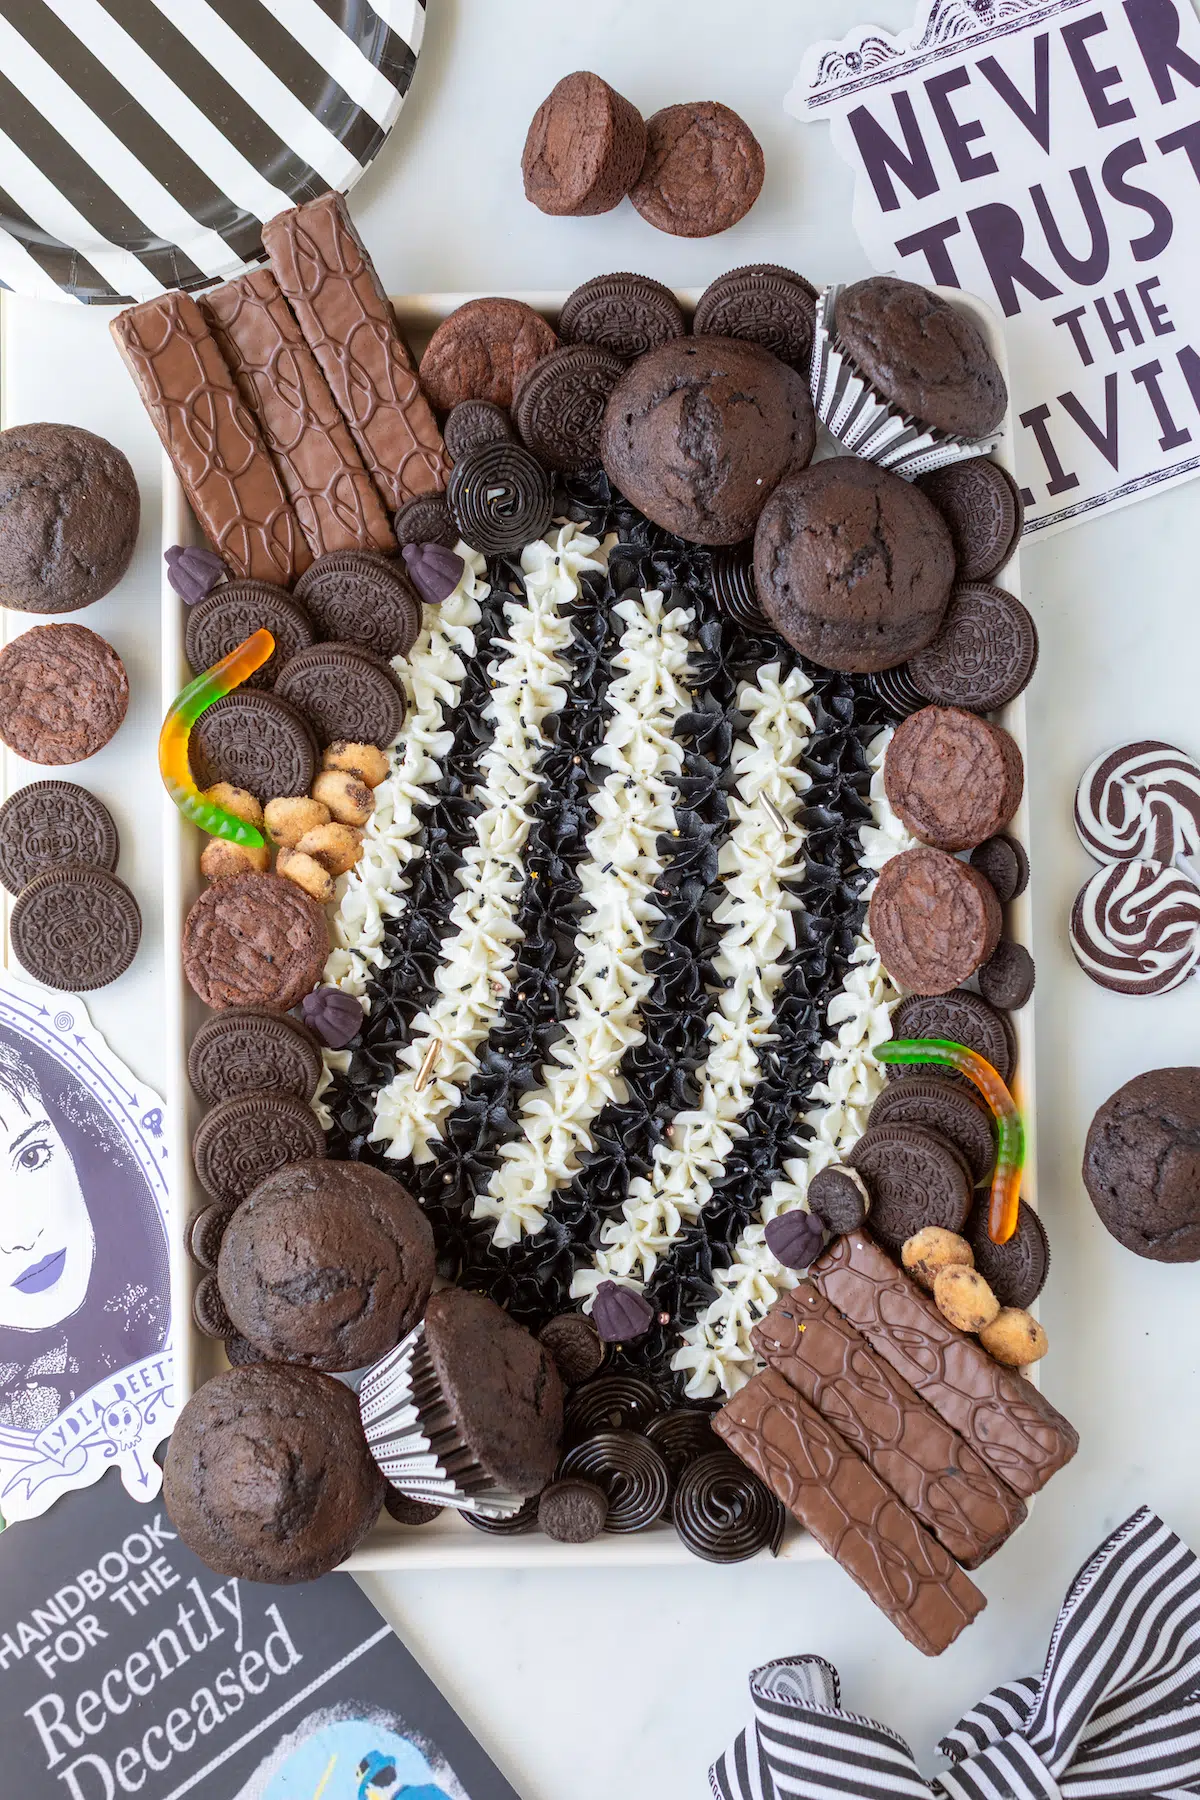 over the top view of buttercream board that is themed for beetlejuice movie